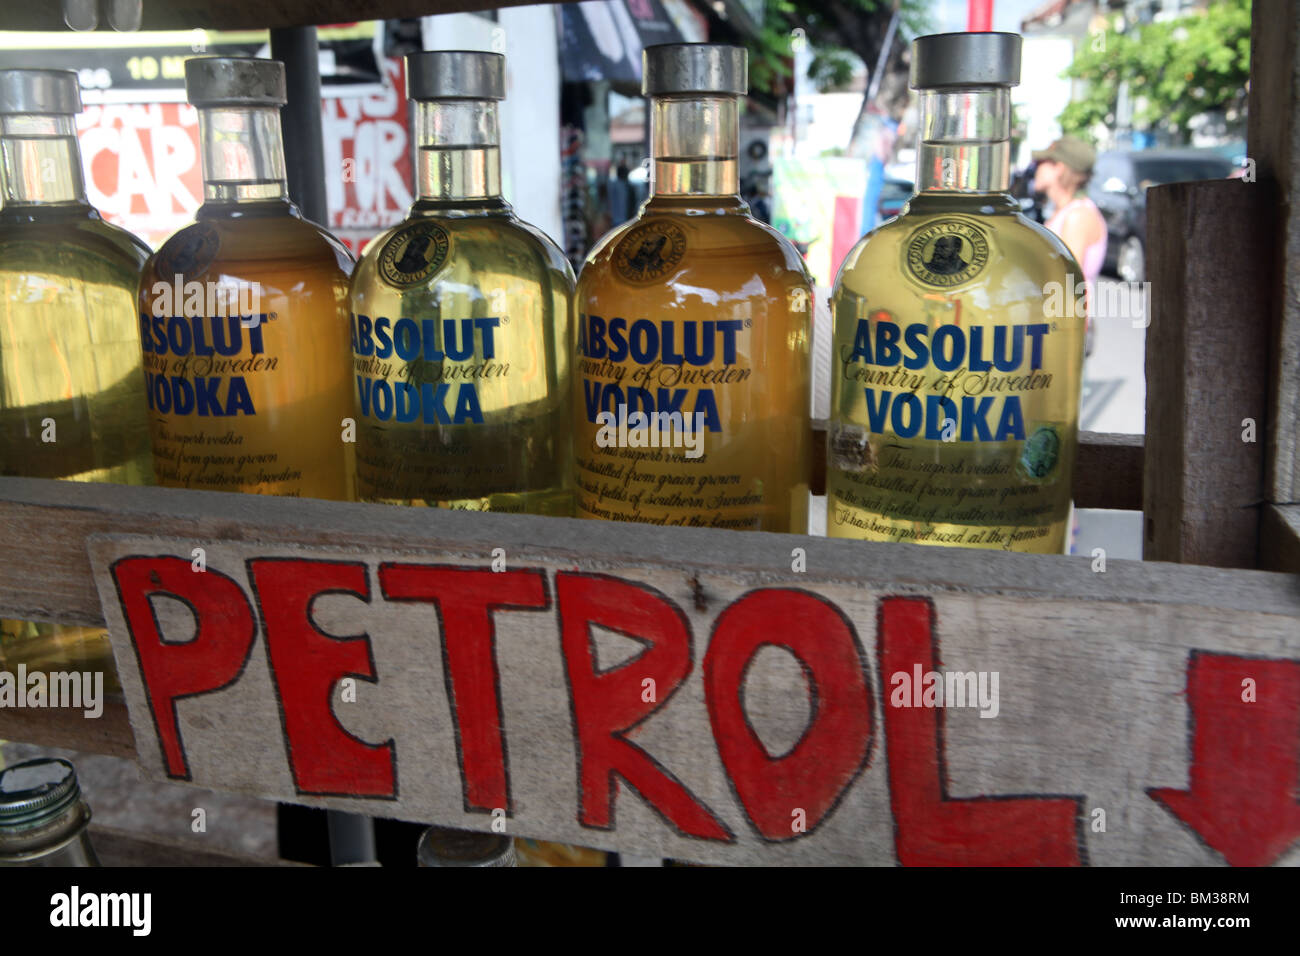 Pertol or gas, commonly stored in Absolut Vodka bottles on the street in Kuta, Bali, Indonesia Stock Photo